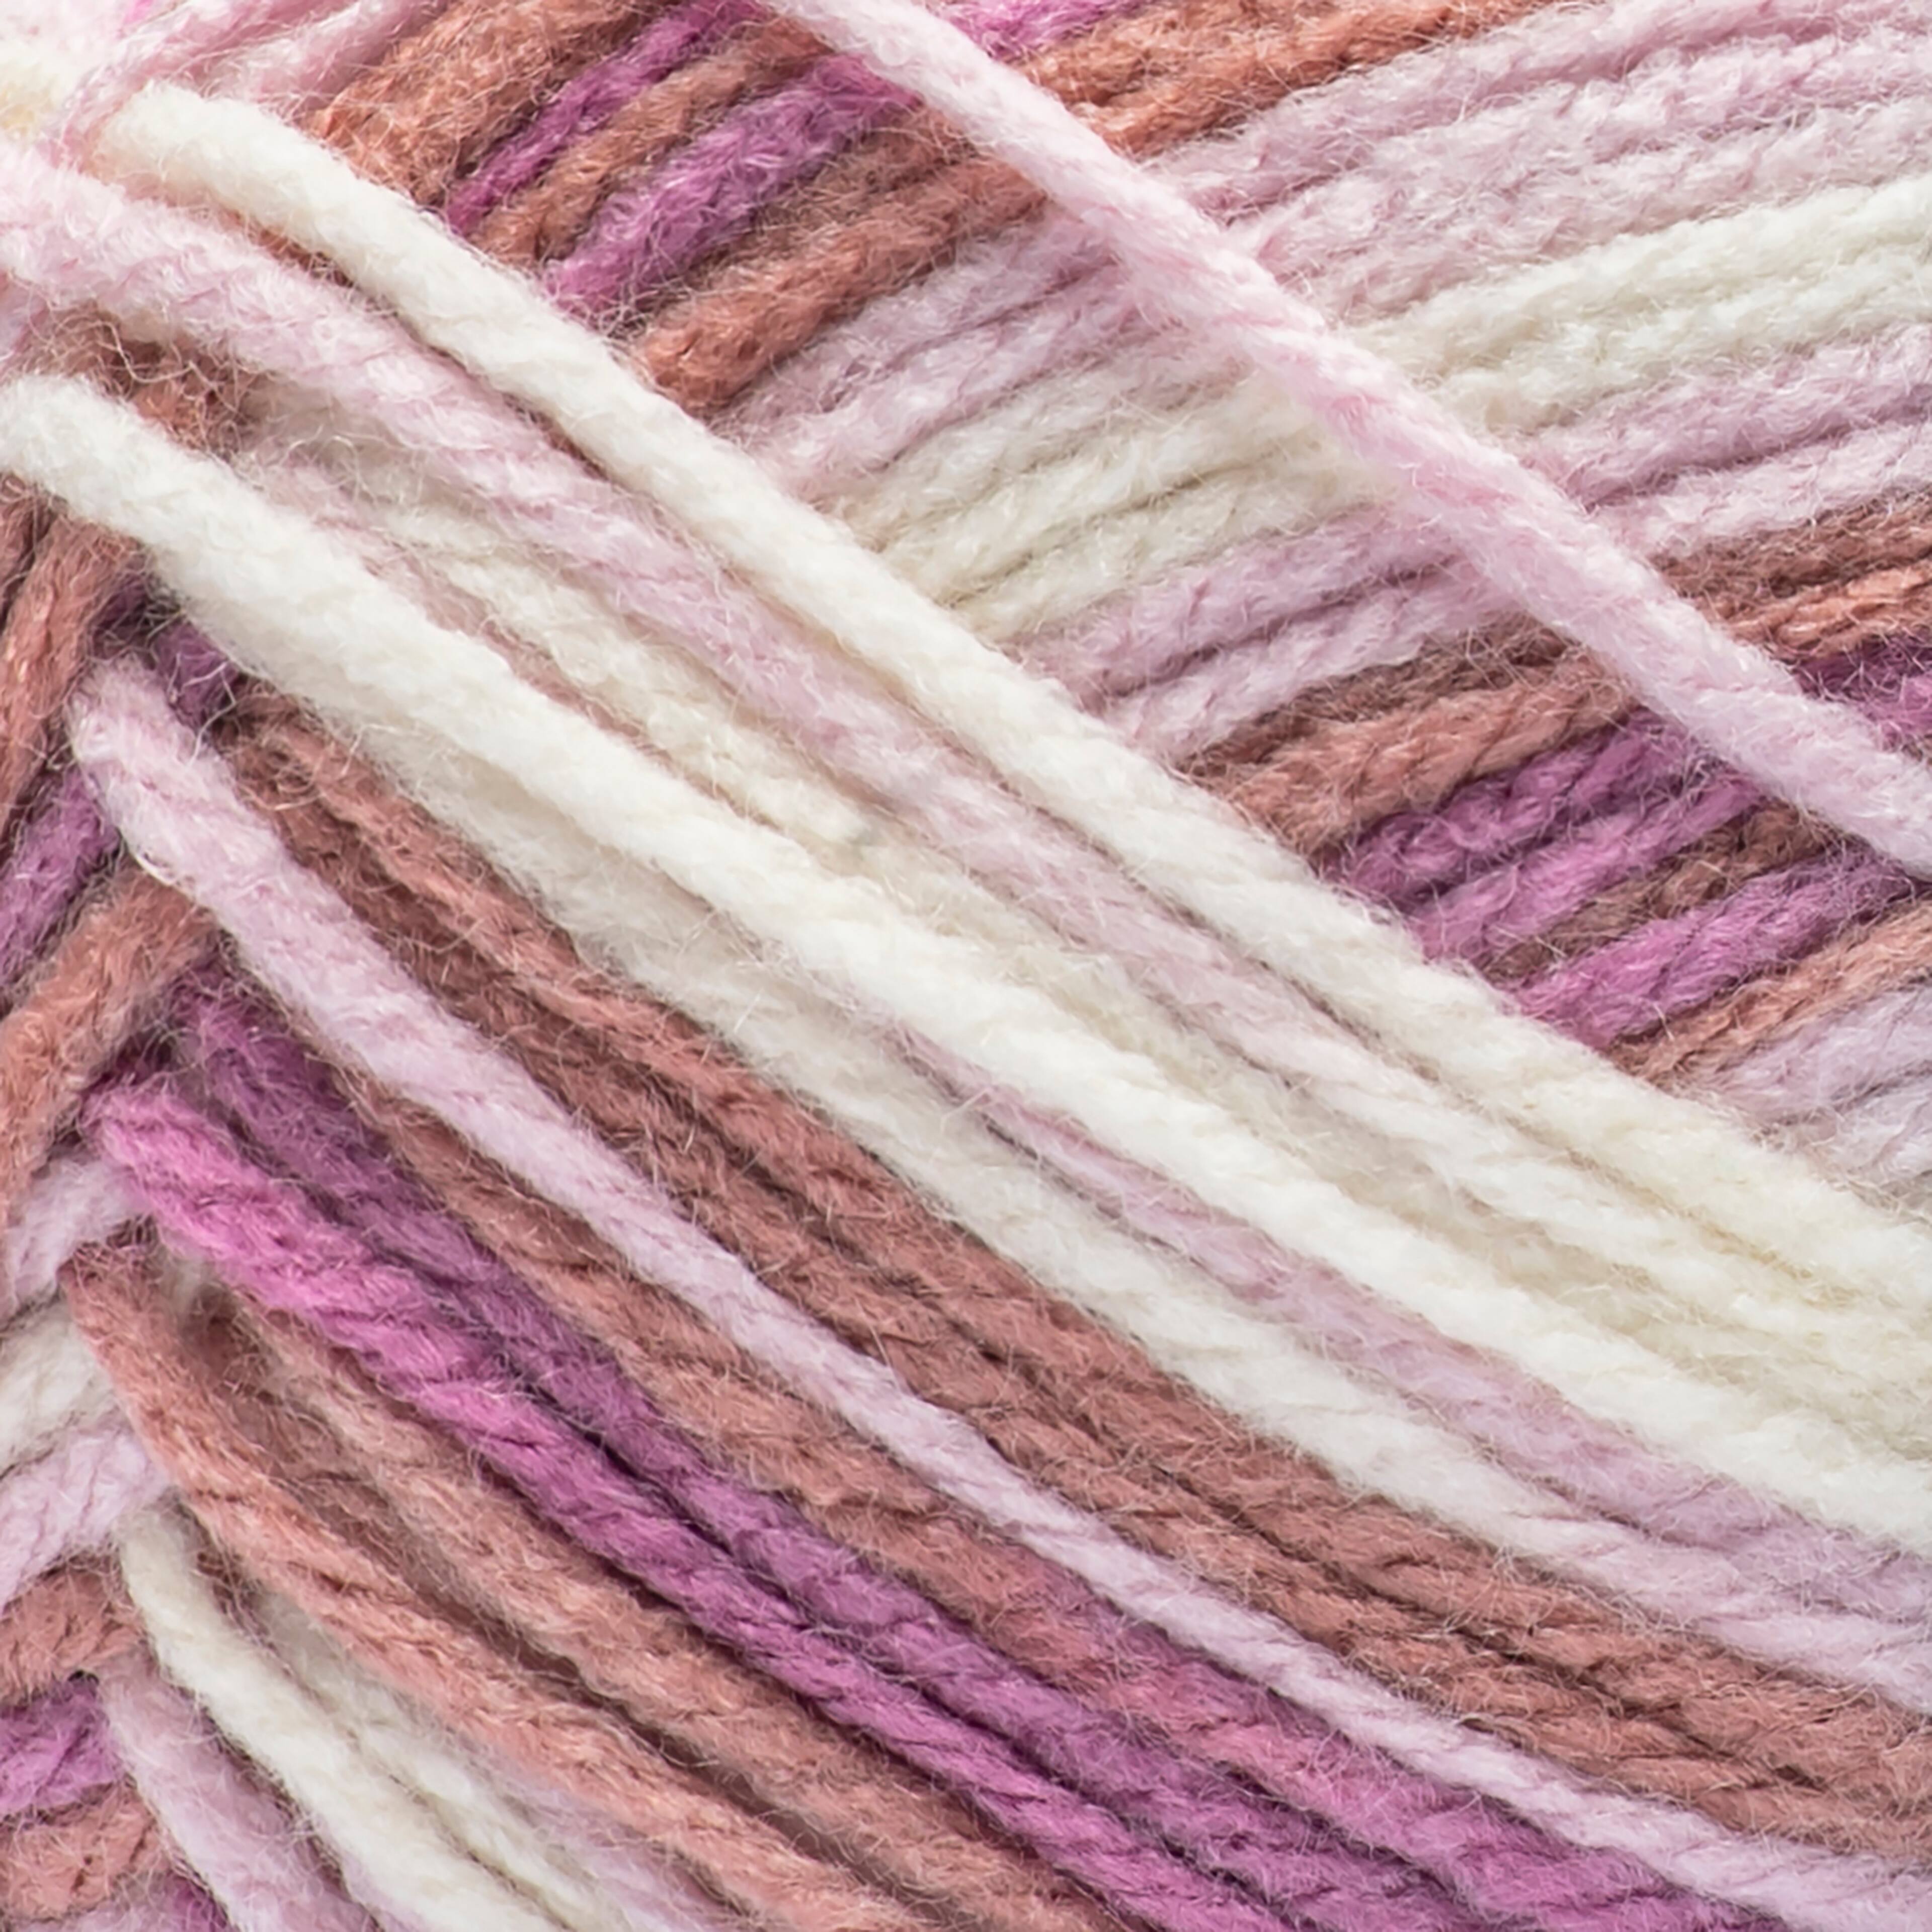 Loops & Threads Impeccable Yarn - Orchid Multicolor - 4.5 oz